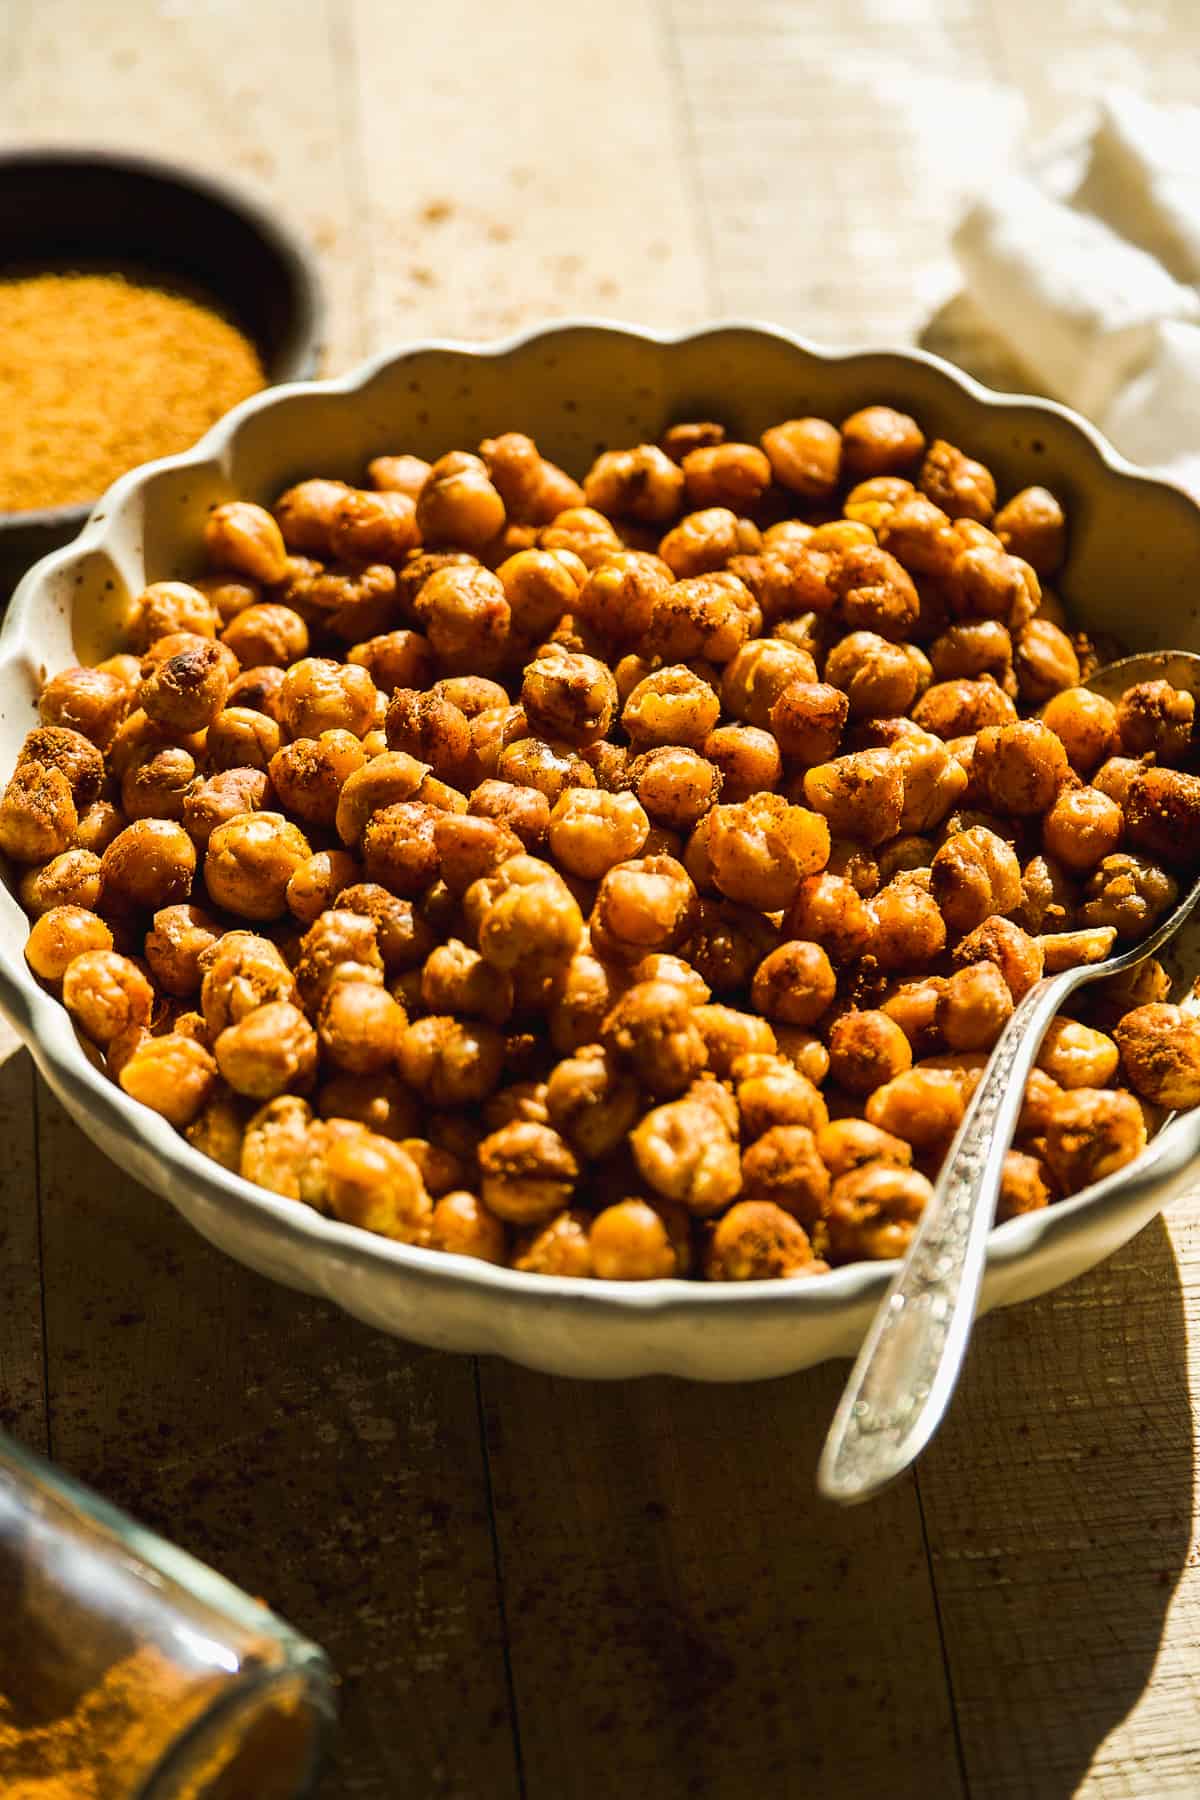 Cinnamon roasted chickpeas in a bowl with a spoon.